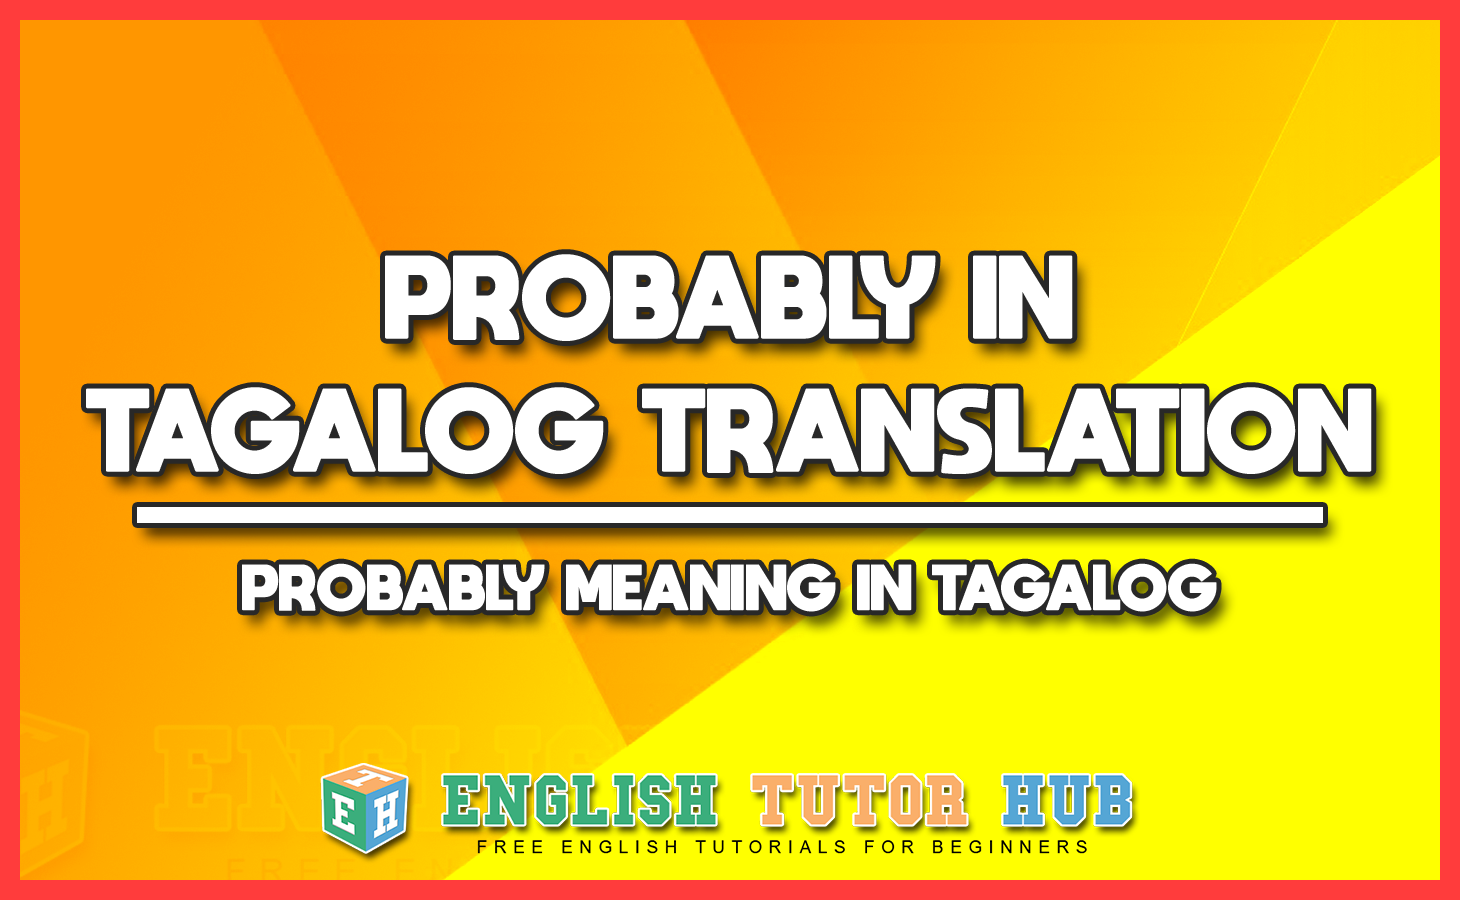 PROBABLY IN TAGALOG TRANSLATION - PROBABLY MEANING IN TAGALOG